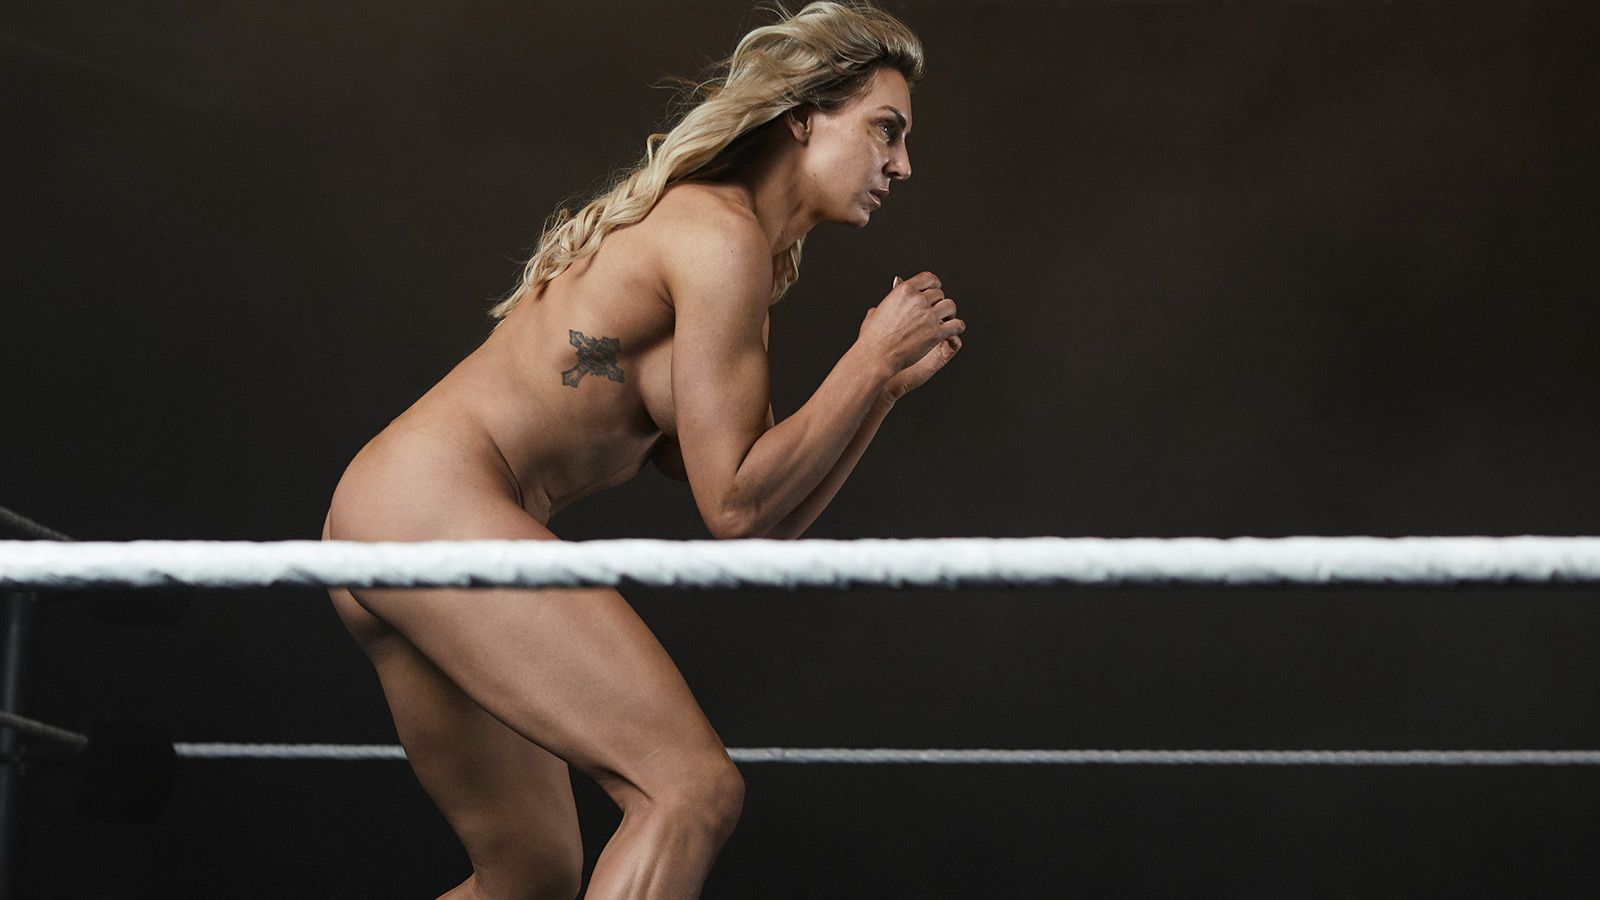 casey nixon recommends Charlotte Flair Butt Naked